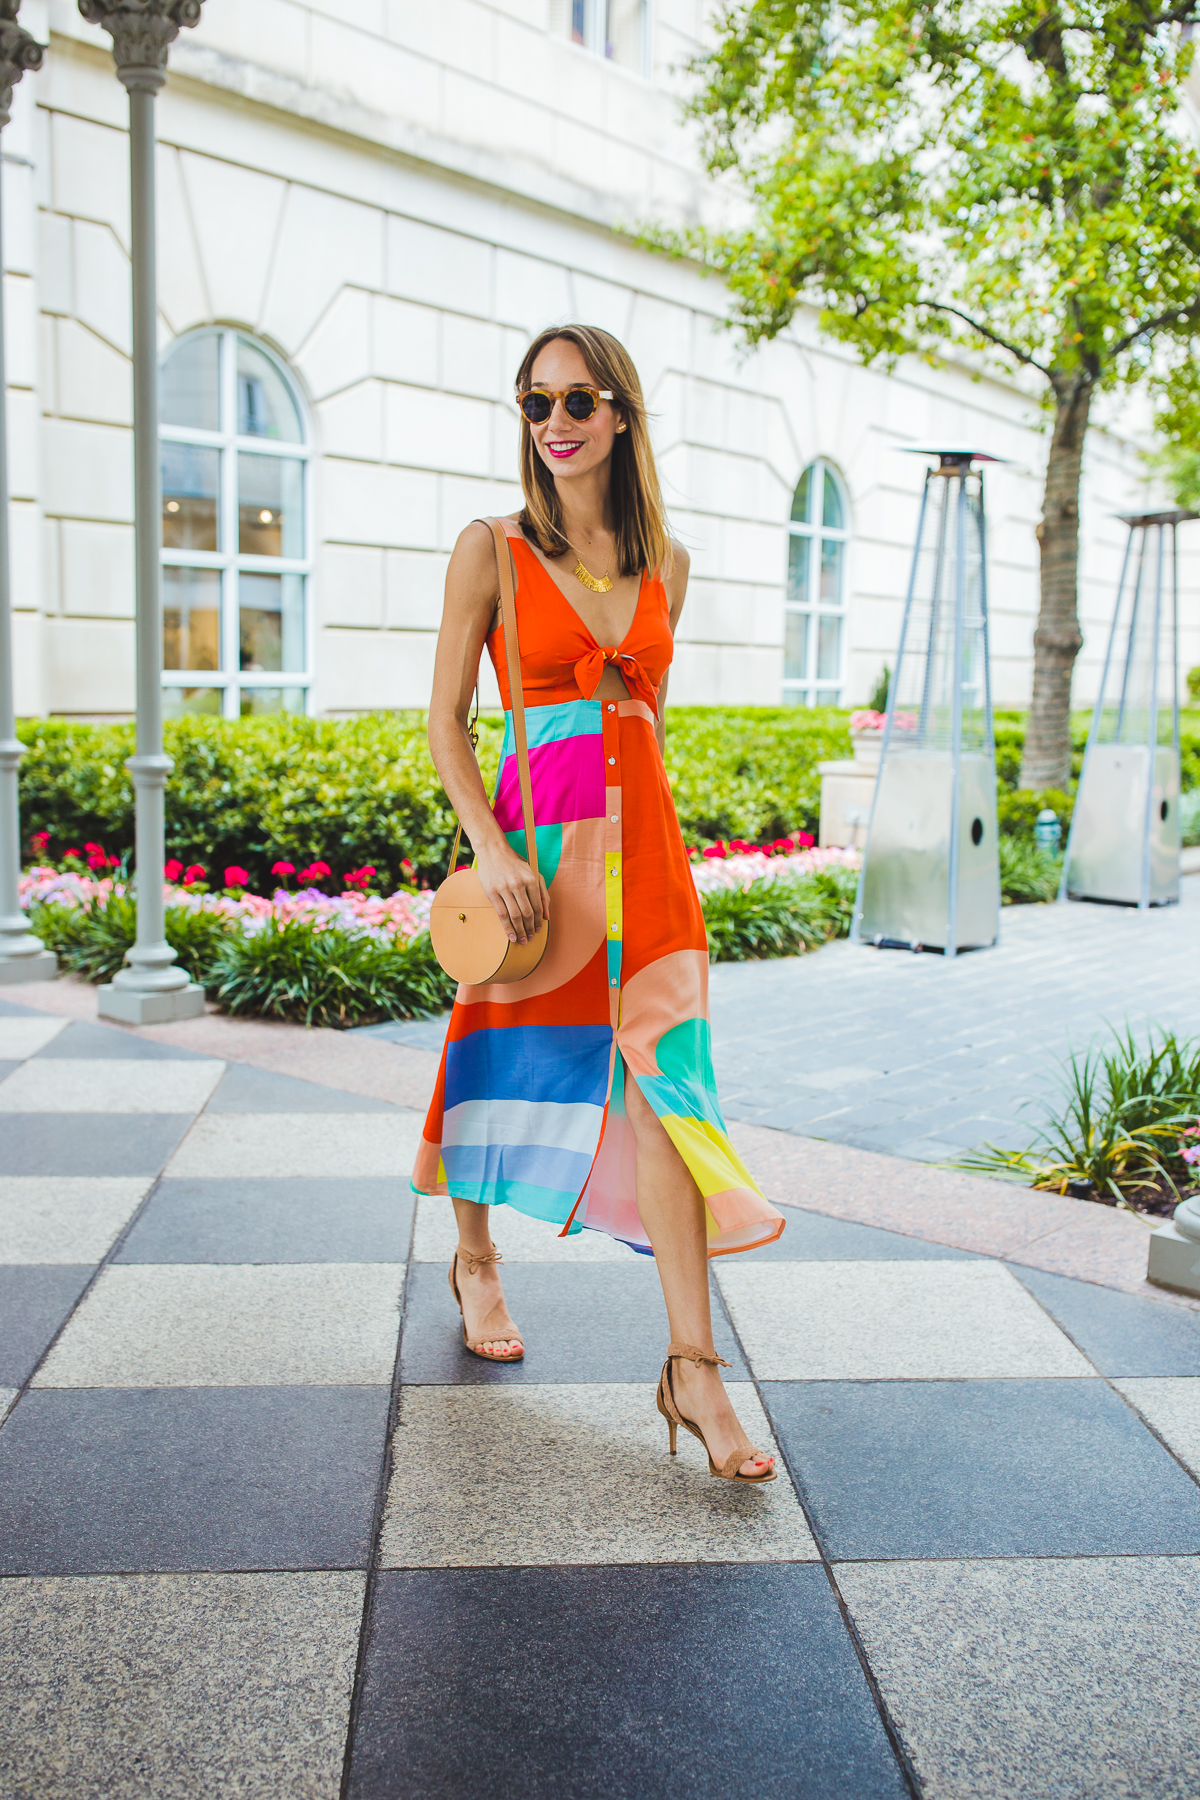 The Fox & She is sharing tips on how to wear a midi dress